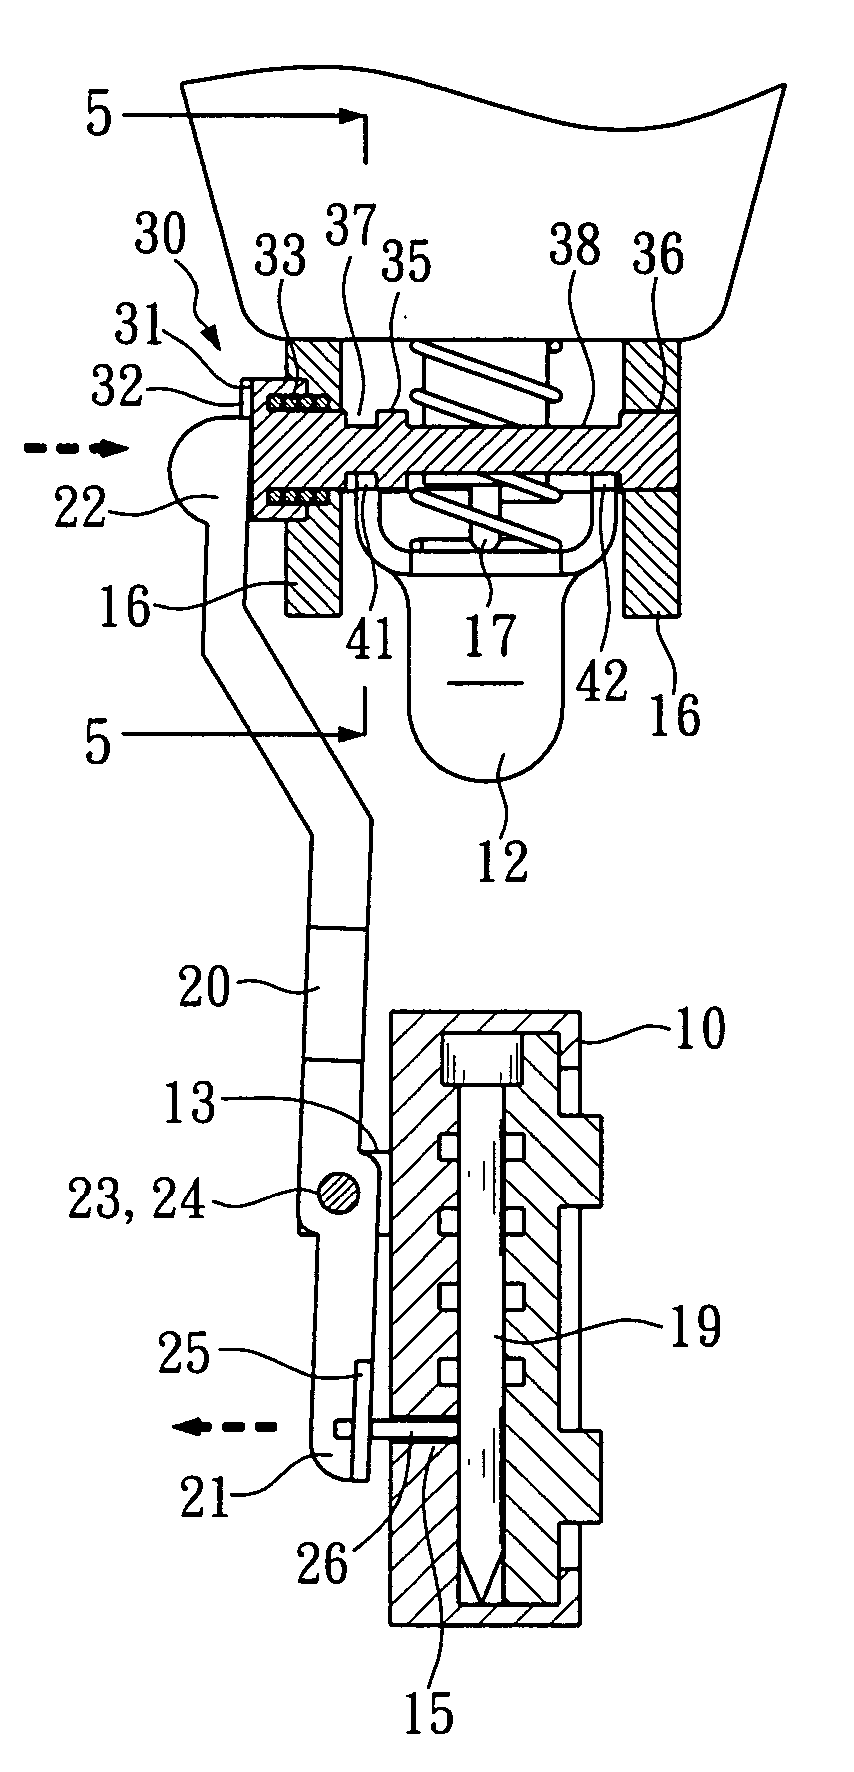 Structure of arresting mechanism for nail guns